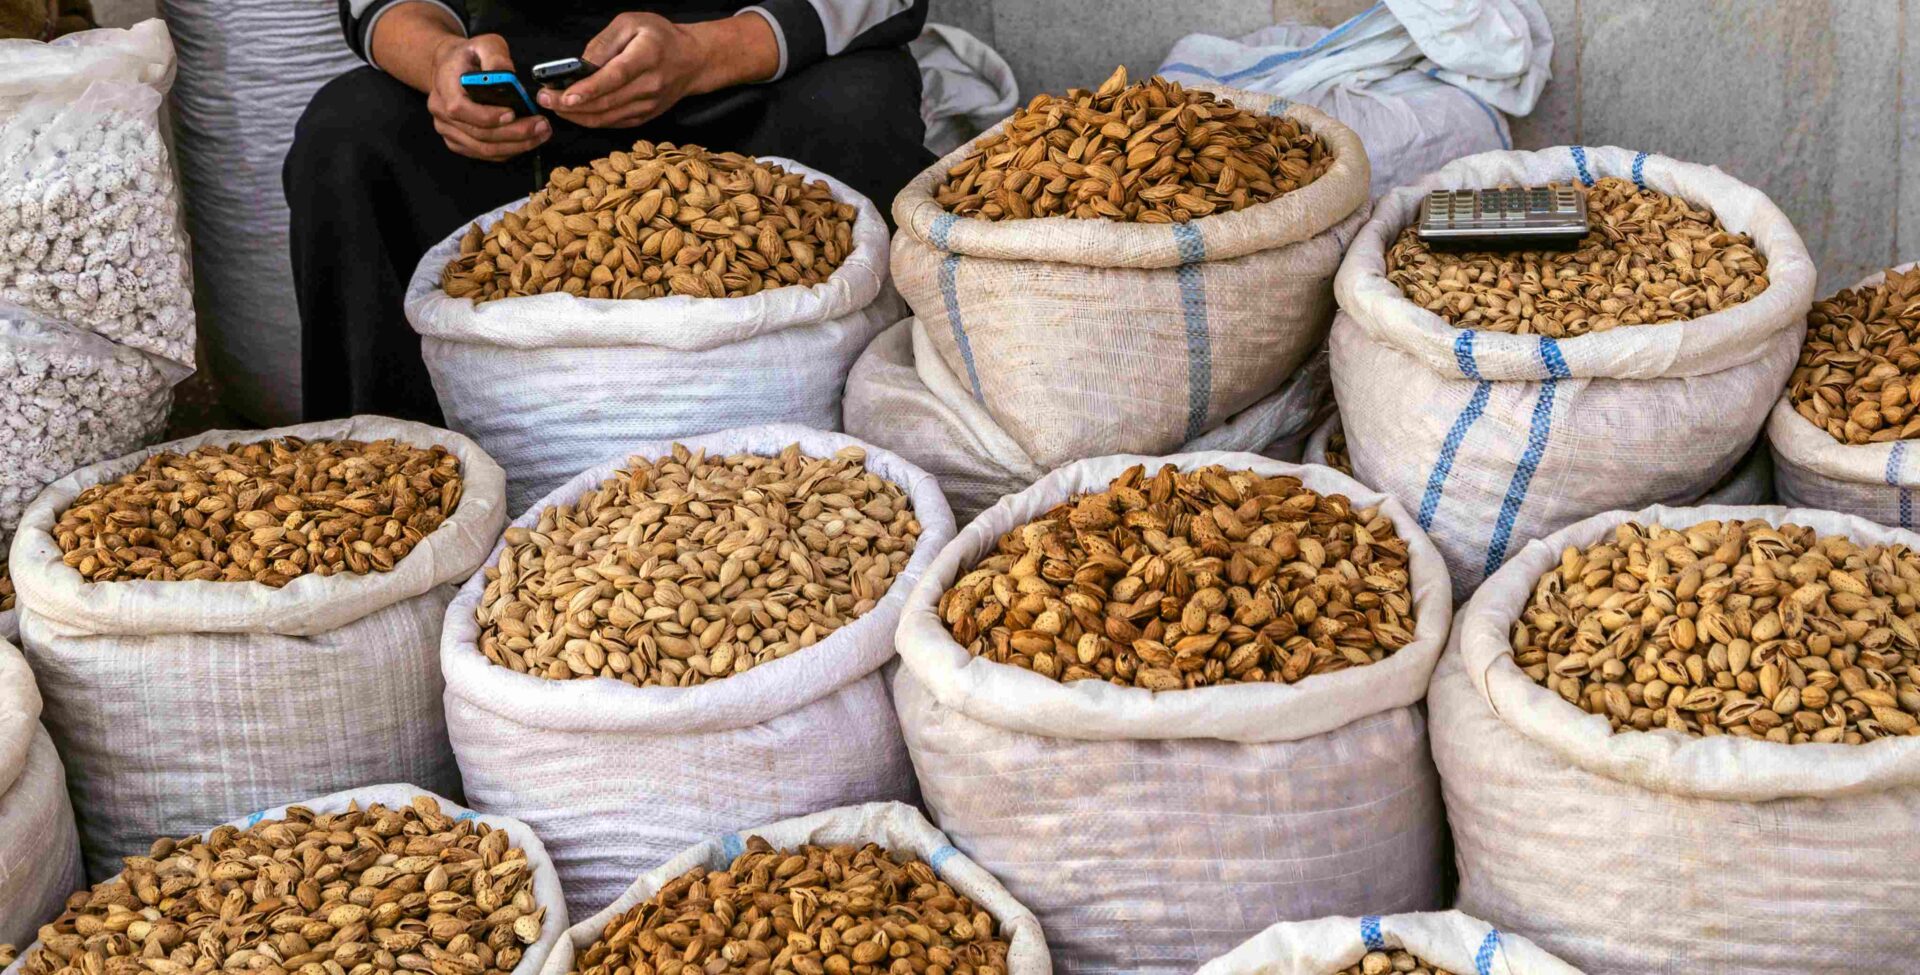 Bushels of Treehouse Inshell Almonds Being Sold